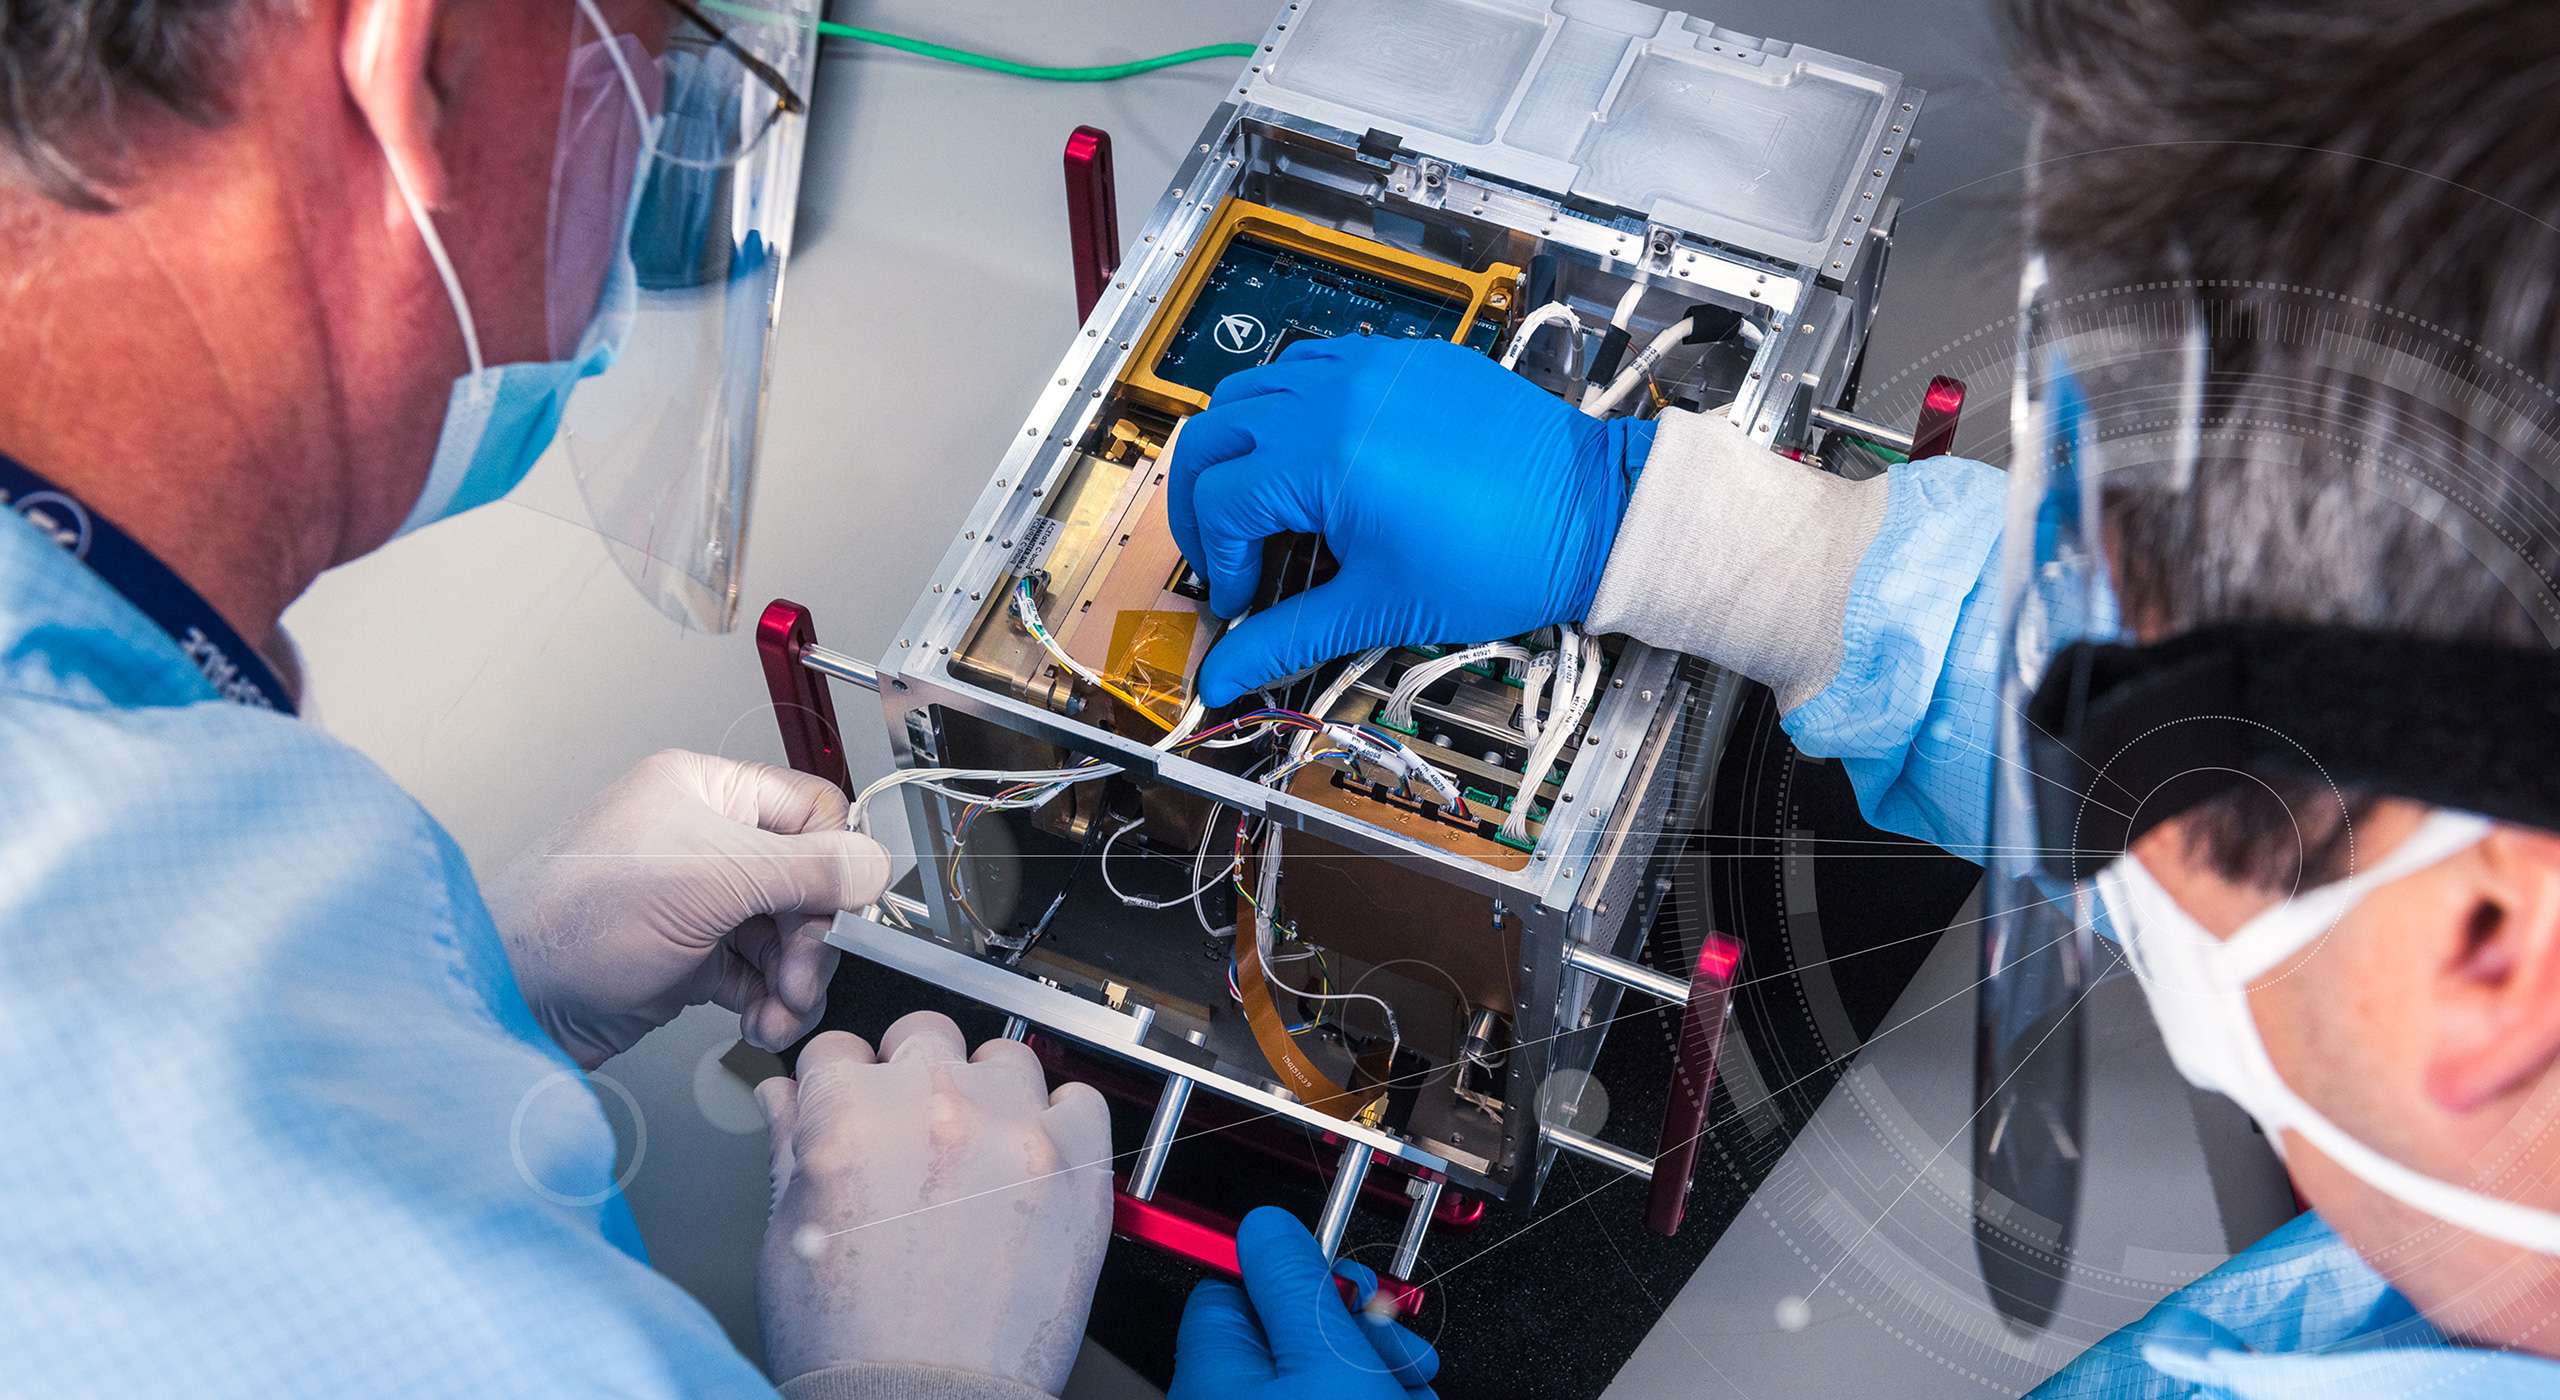 Image of Aerospace engineers working on electronics integration into a cubesat.